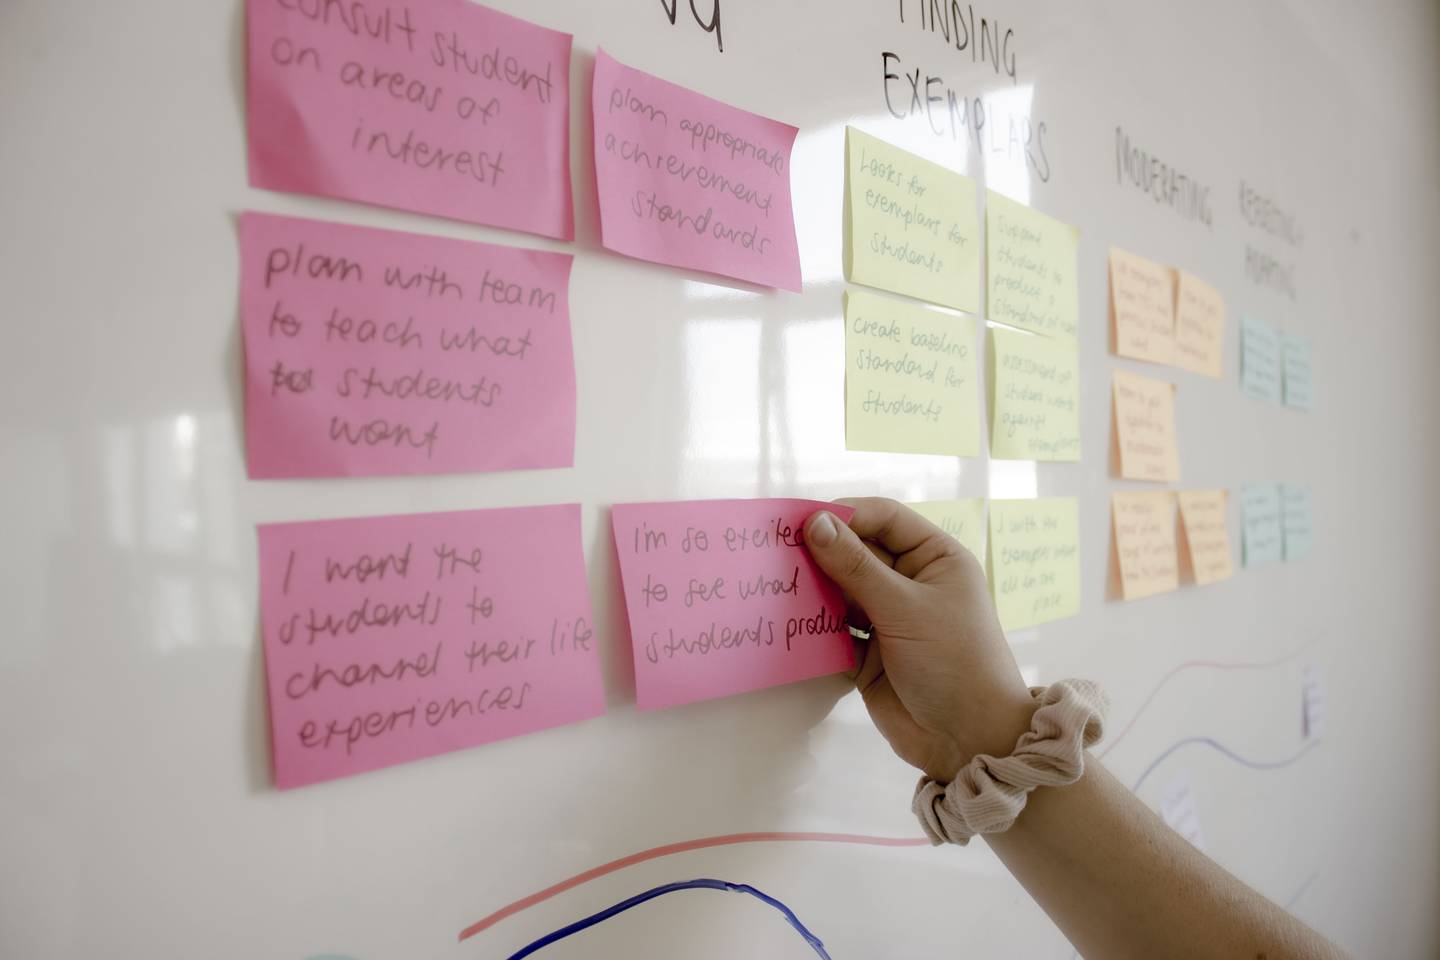 Customer journey mapping with post-it notes on whiteboard